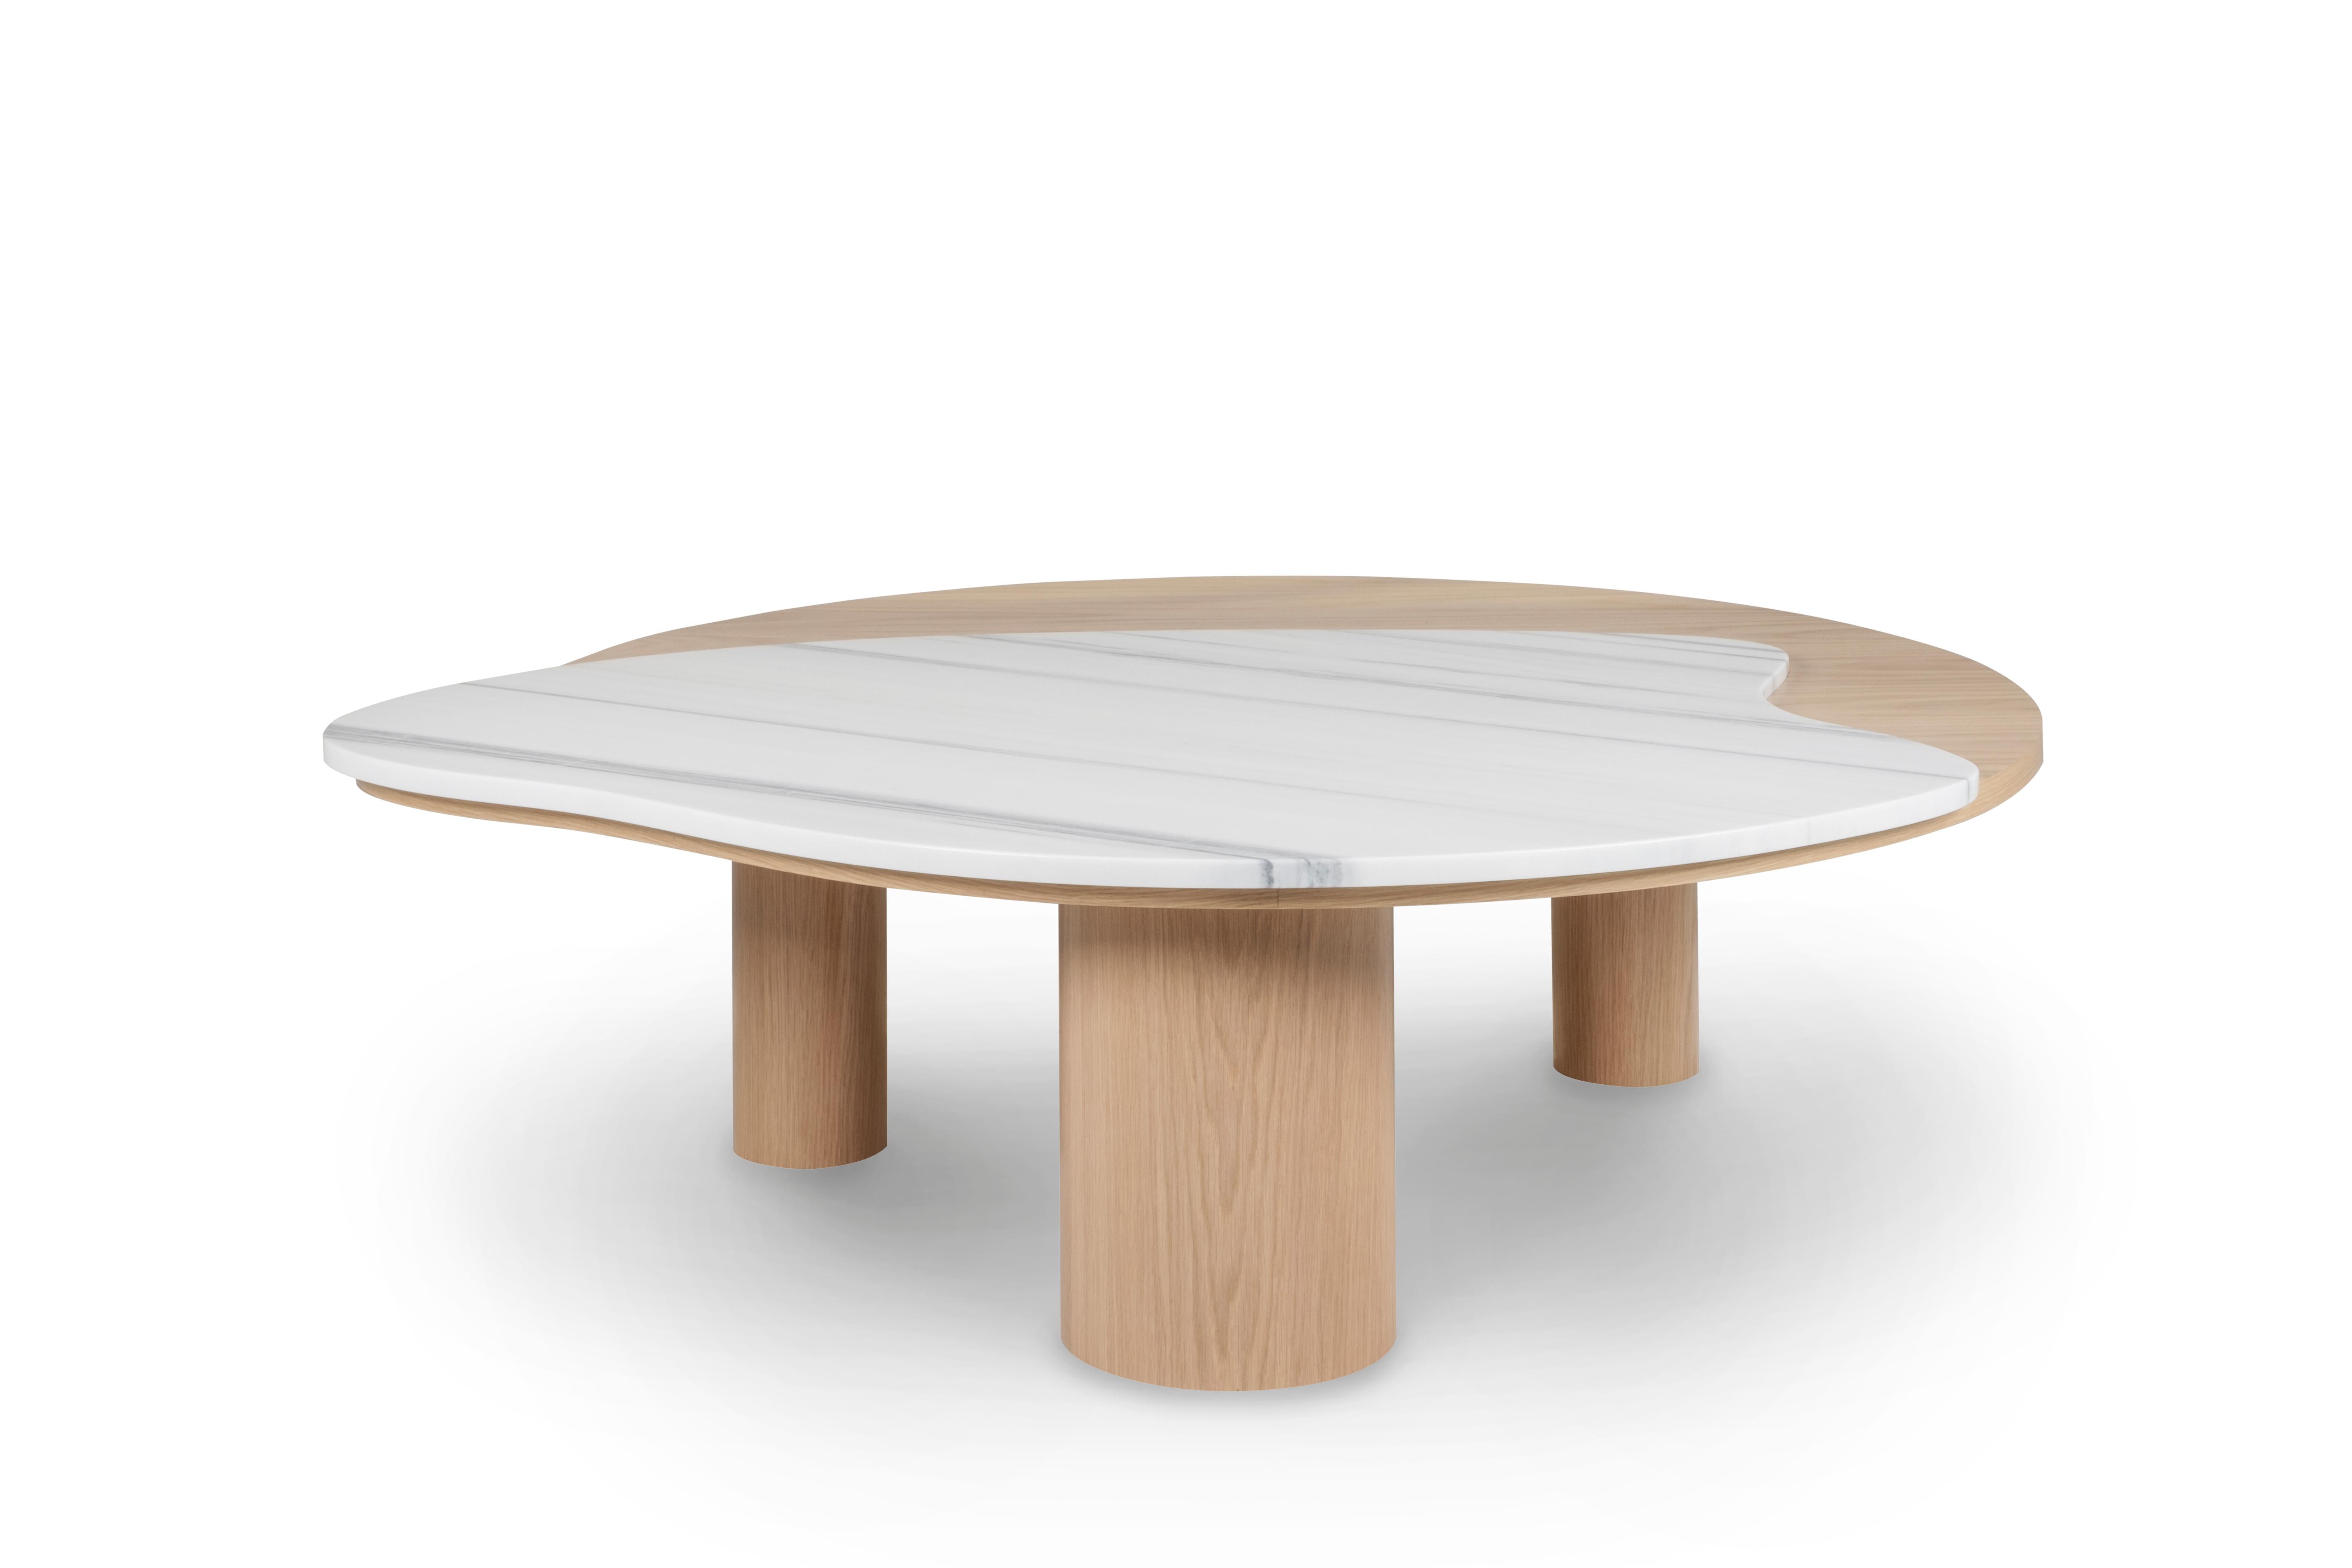 Bordeira Coffee Table, Contemporary Collection, Handcrafted in Portugal - Europe by Greenapple.

Designed by Rute Martins for the Contemporary Collection, the Bordeira modern coffee table was designed to add the essence of nature into the interior